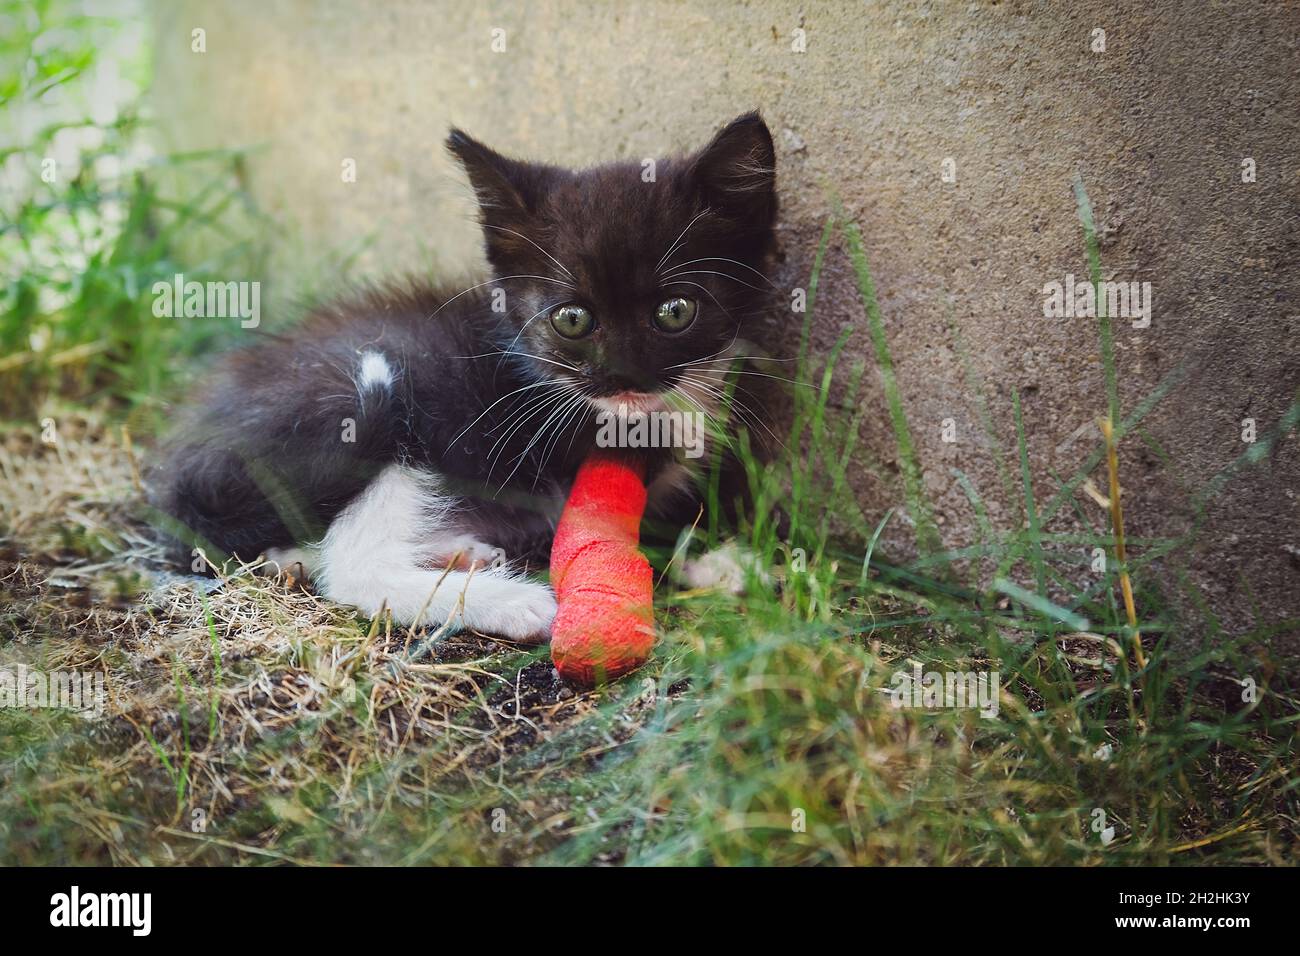 Kitten with injured leg in red plaster cast.  Animal healthcare concept Stock Photo